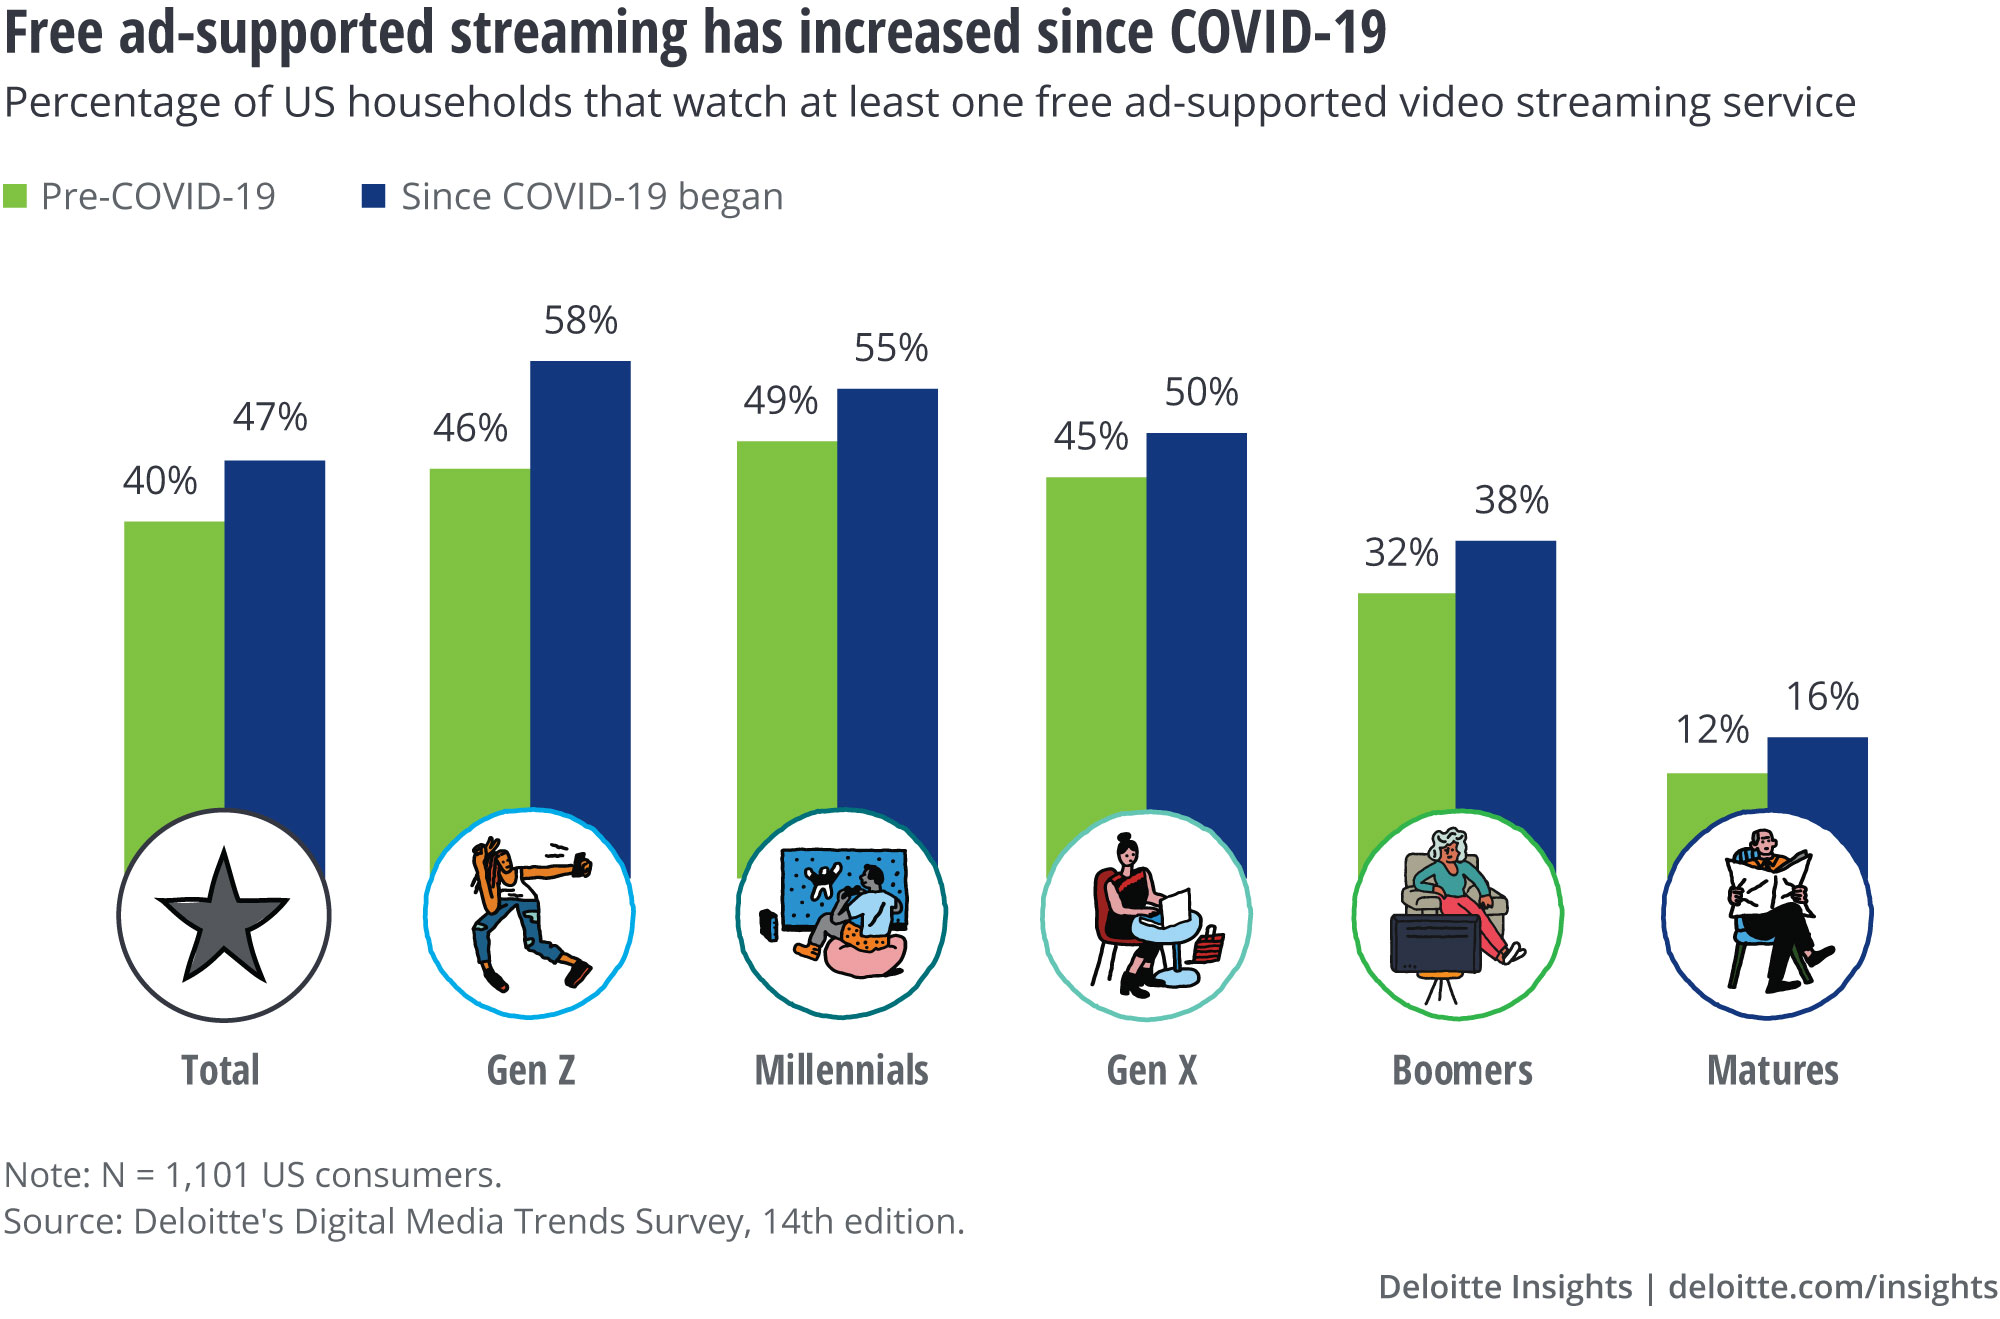 Close to half of US consumers now use a free ad-supported streaming video service